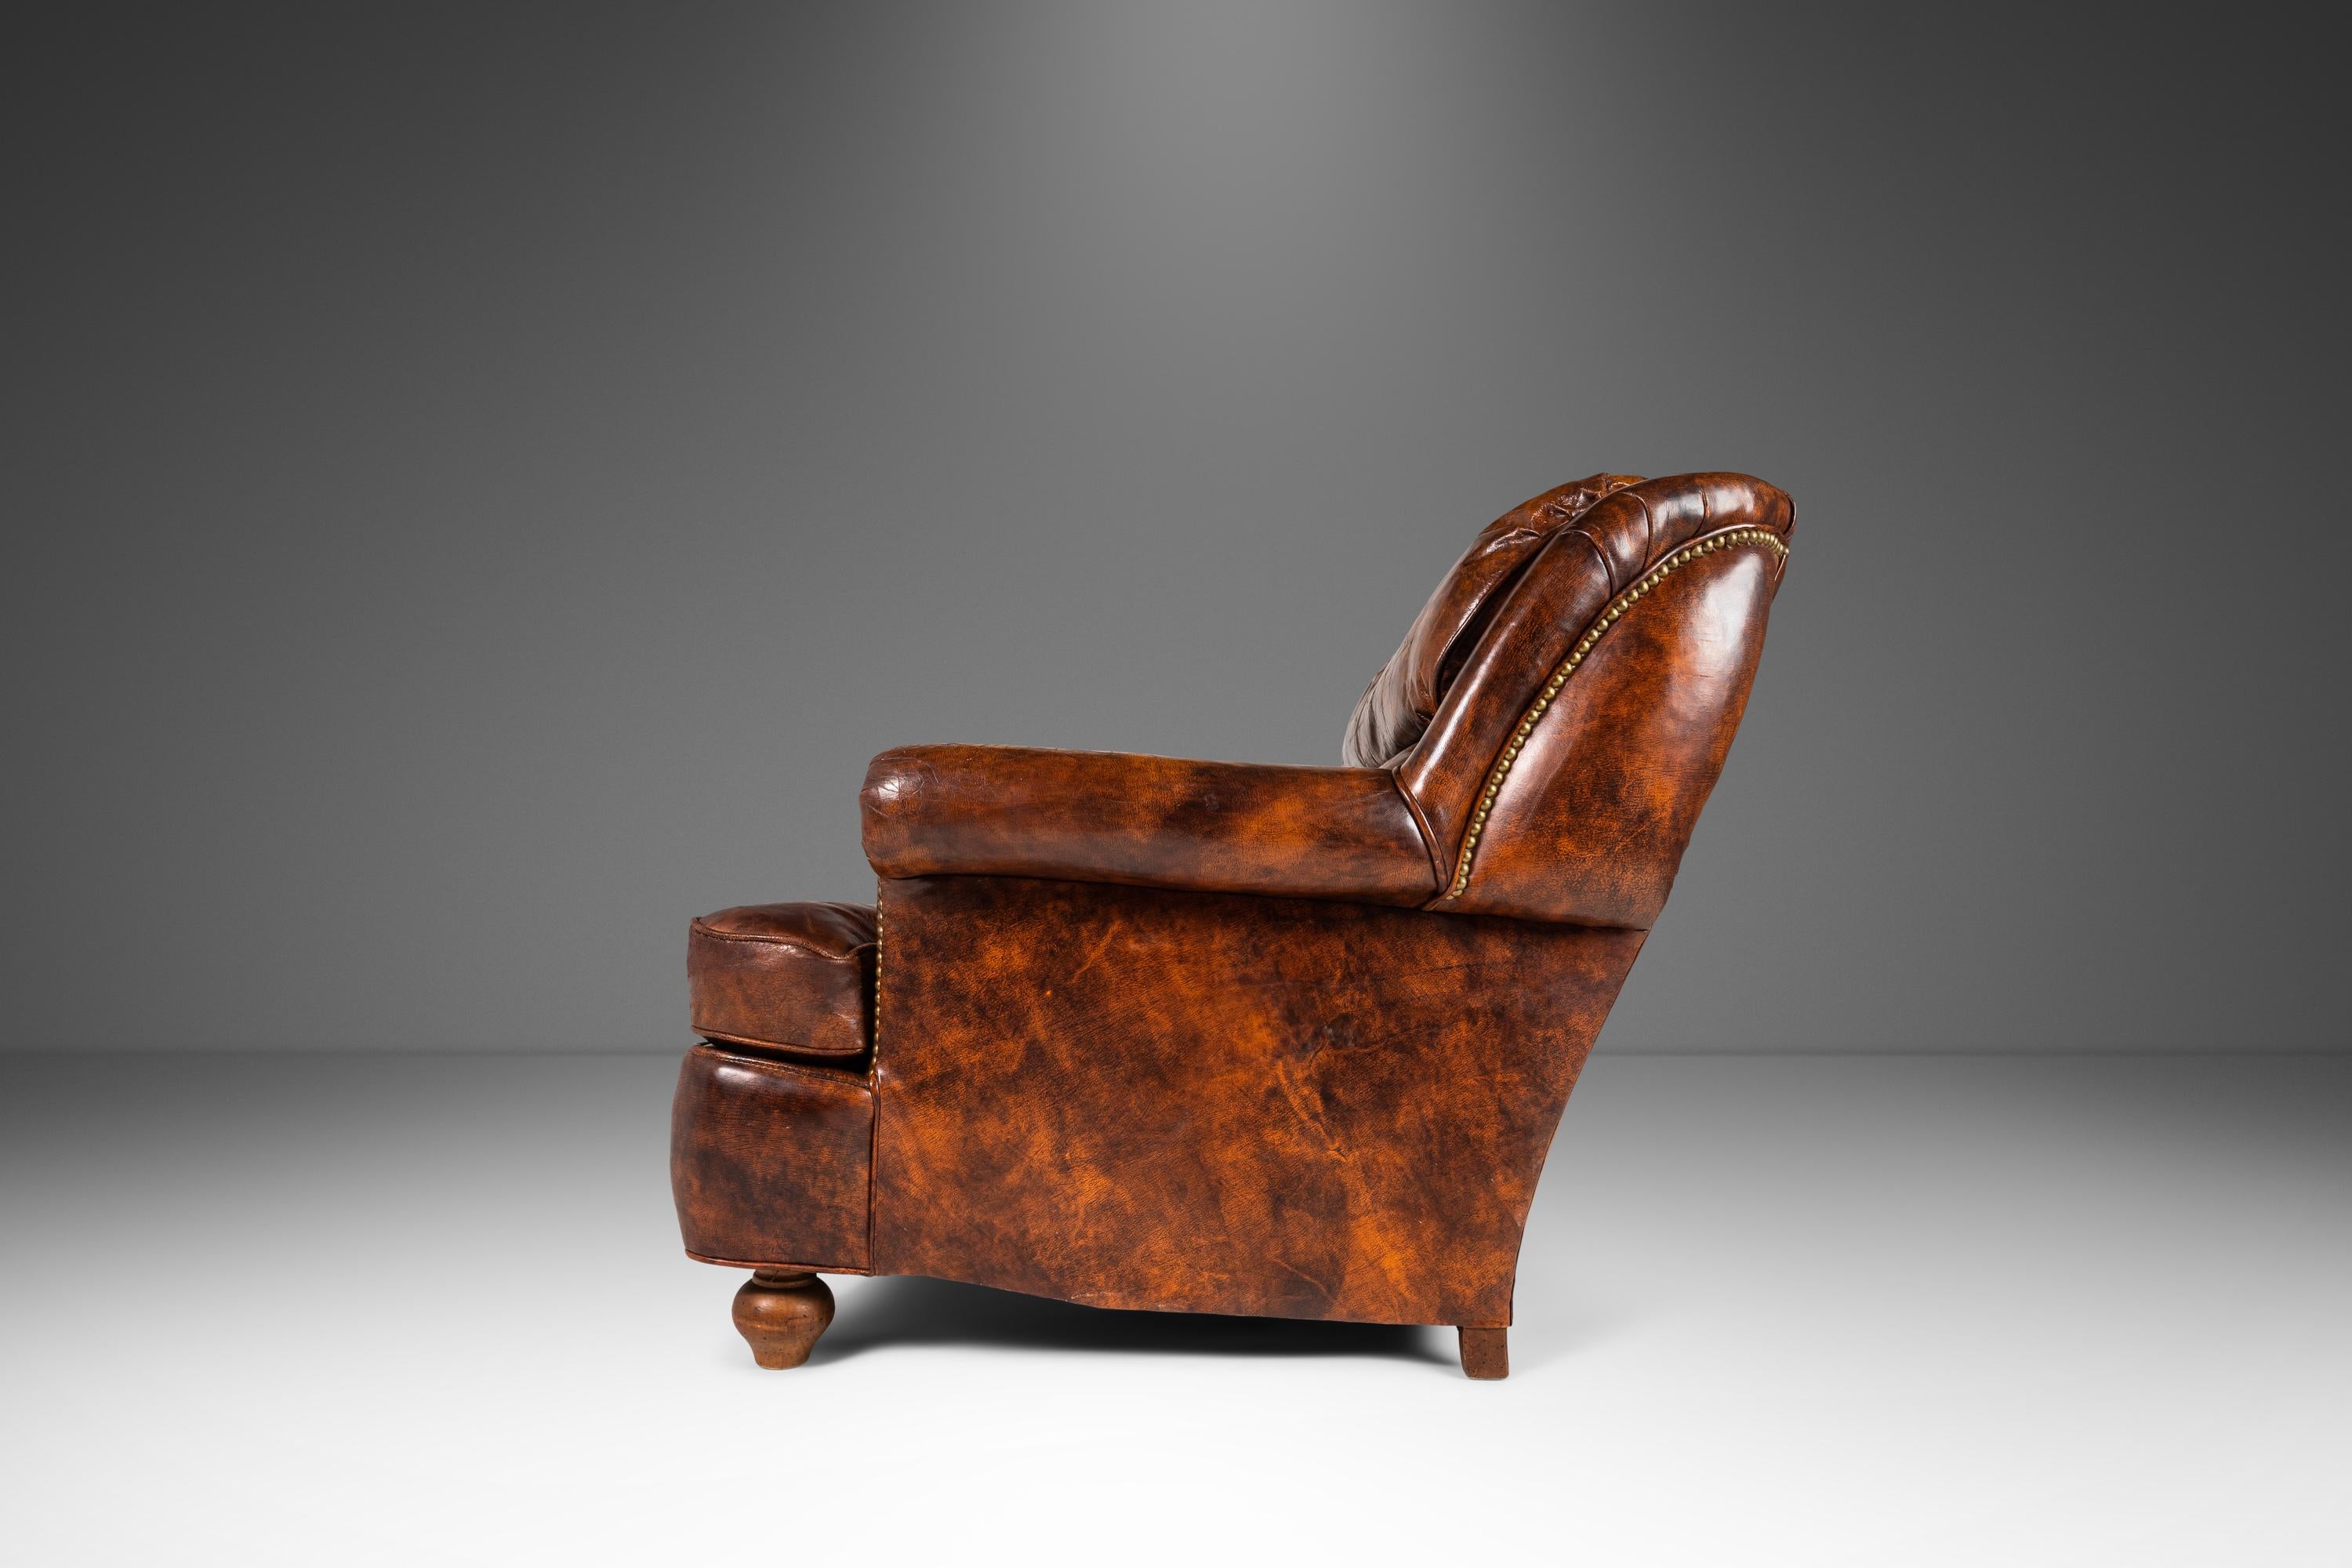 Patinaed French Club Chair Cigar Chair & Ottoman in Distressed Leather c. 1940s For Sale 3